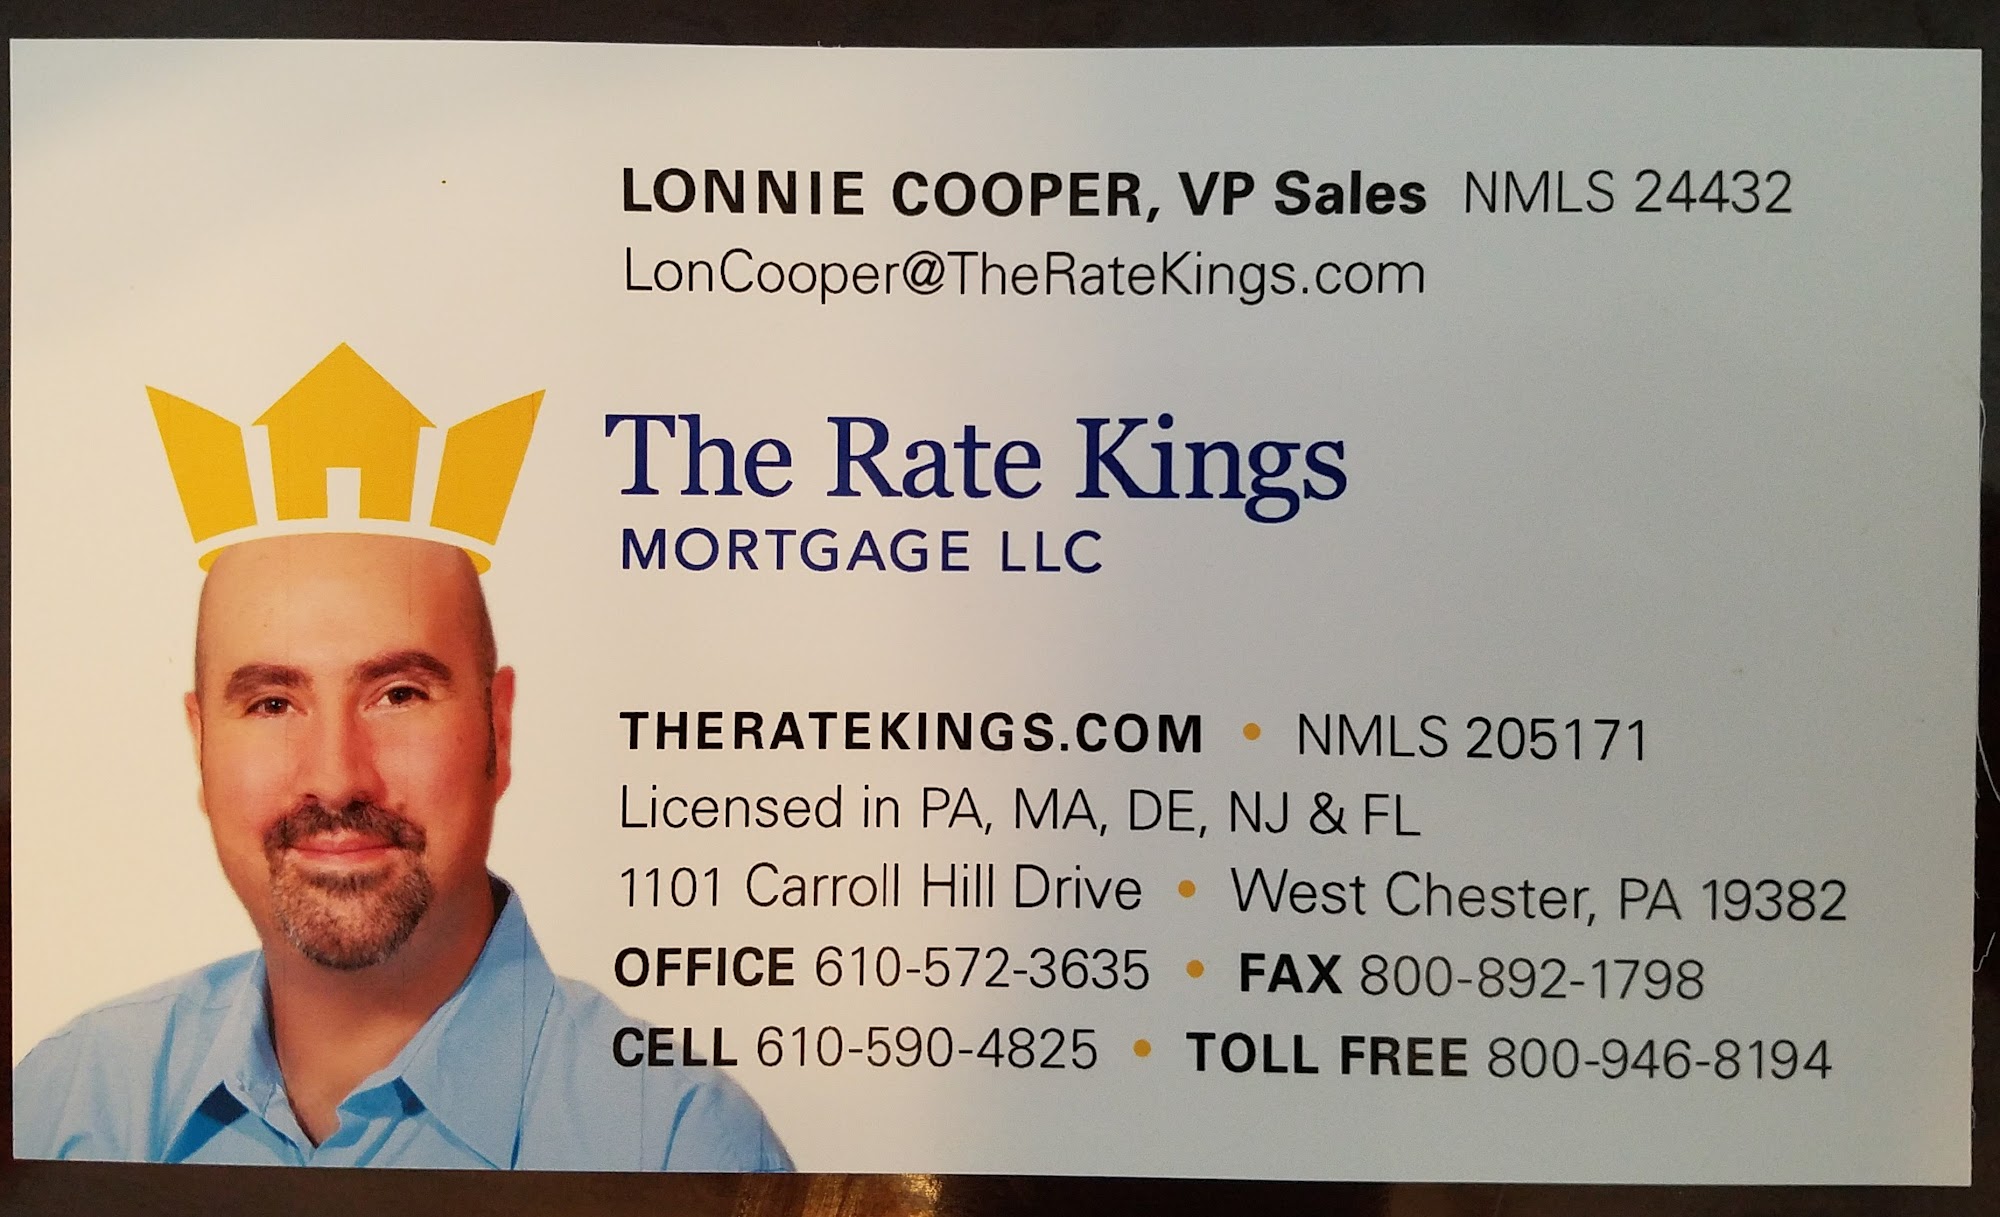 The Rate Kings Mortgage LLC